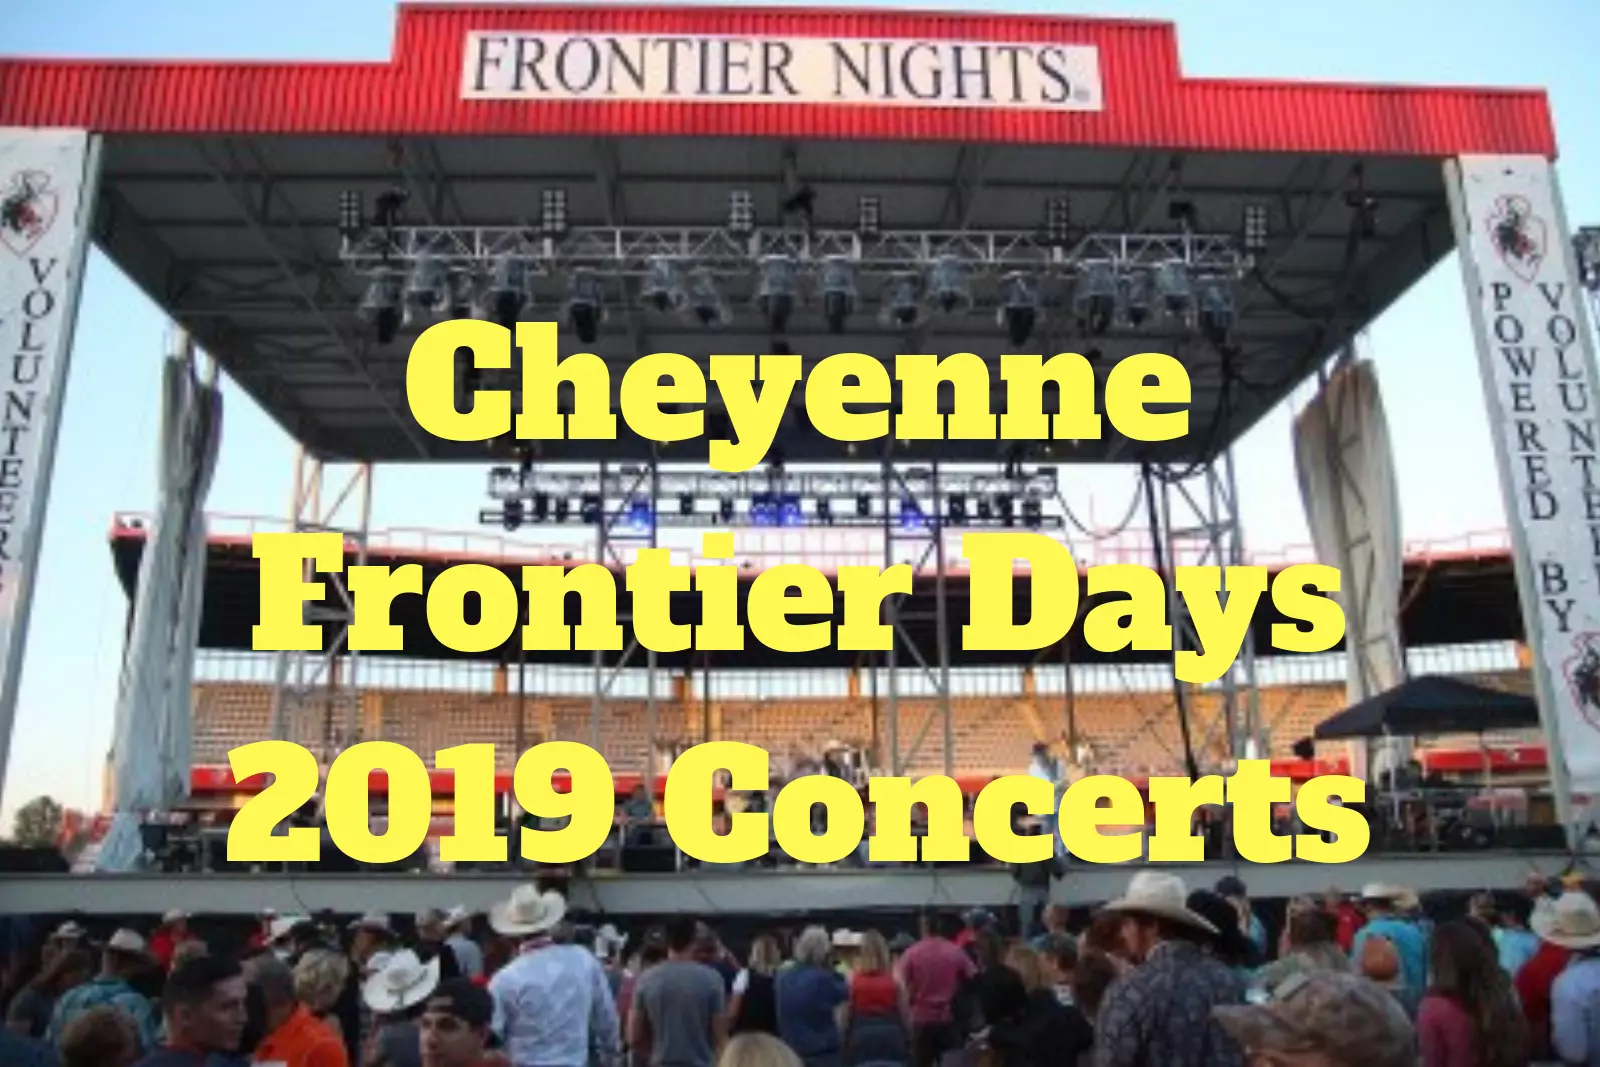 Cheyenne Frontier Days 2019 Concerts Announcement Coming Thursday